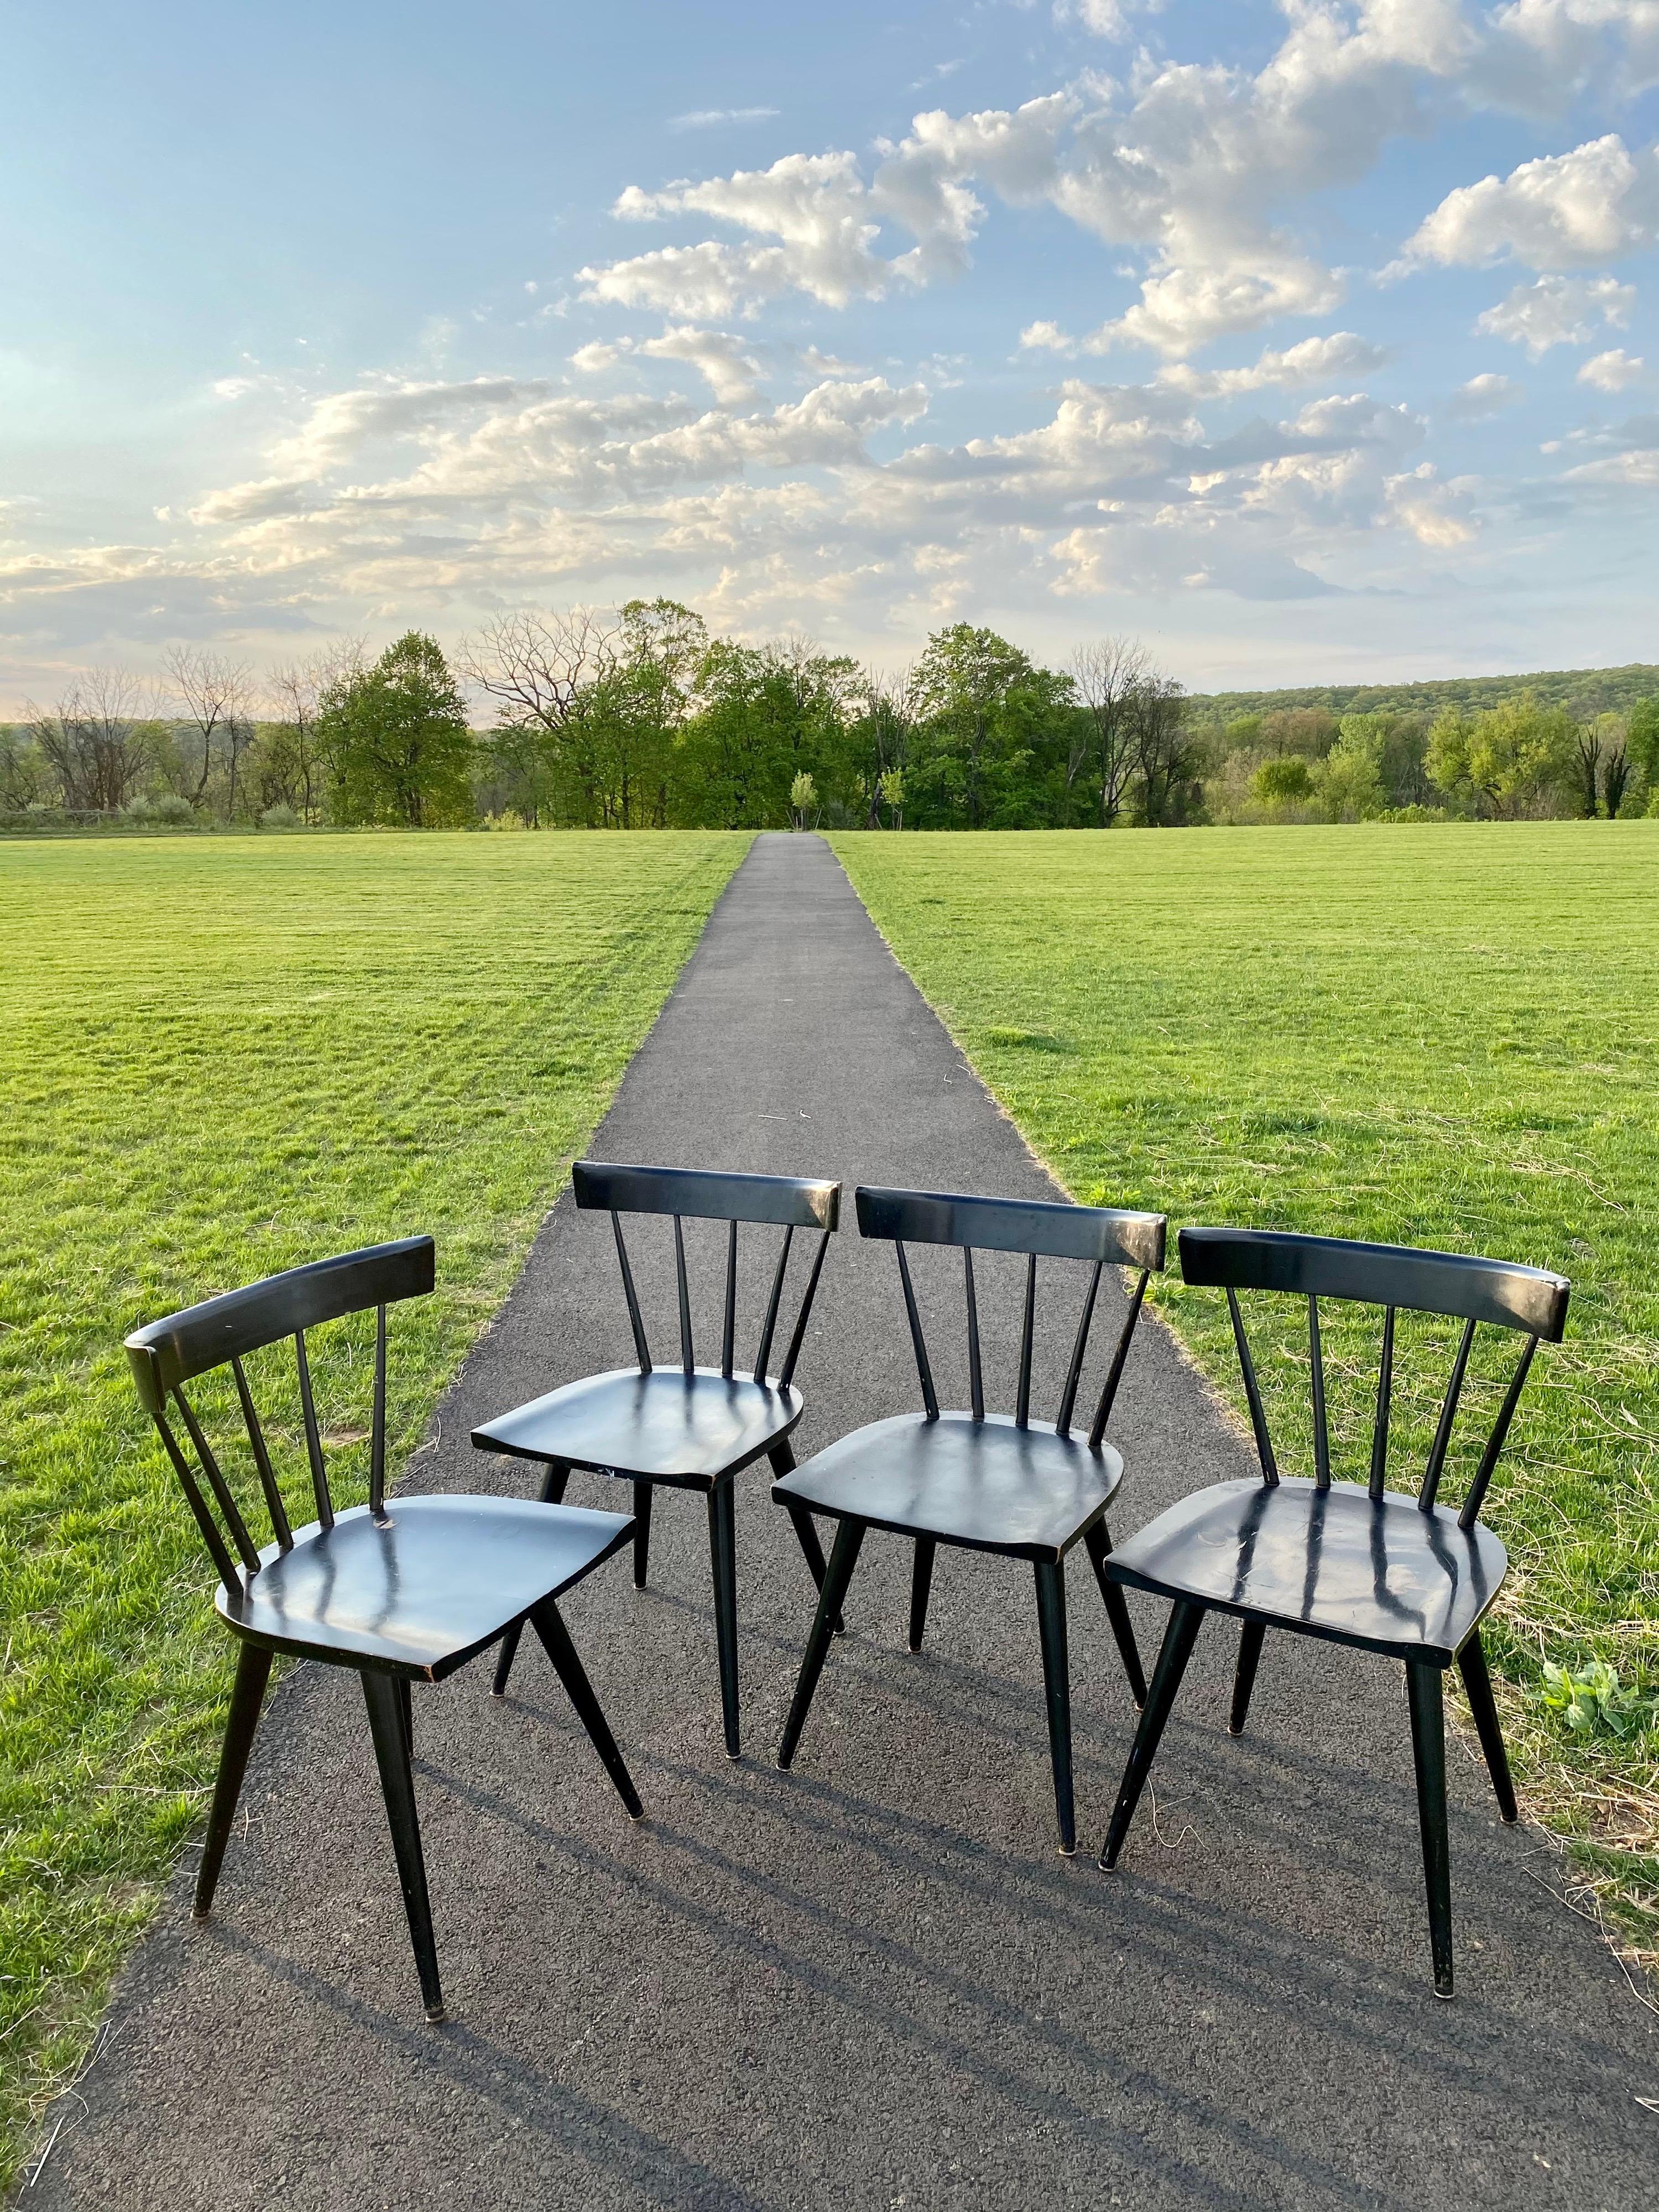 Set of four Mid-Century Modern Paul McCobb for Planner Winchendon dining chairs. These sleek Windsor style chairs feature curved backs, five rounded spindles, and all original black lacquer painted finish. Wonderful patina and wear to some corners